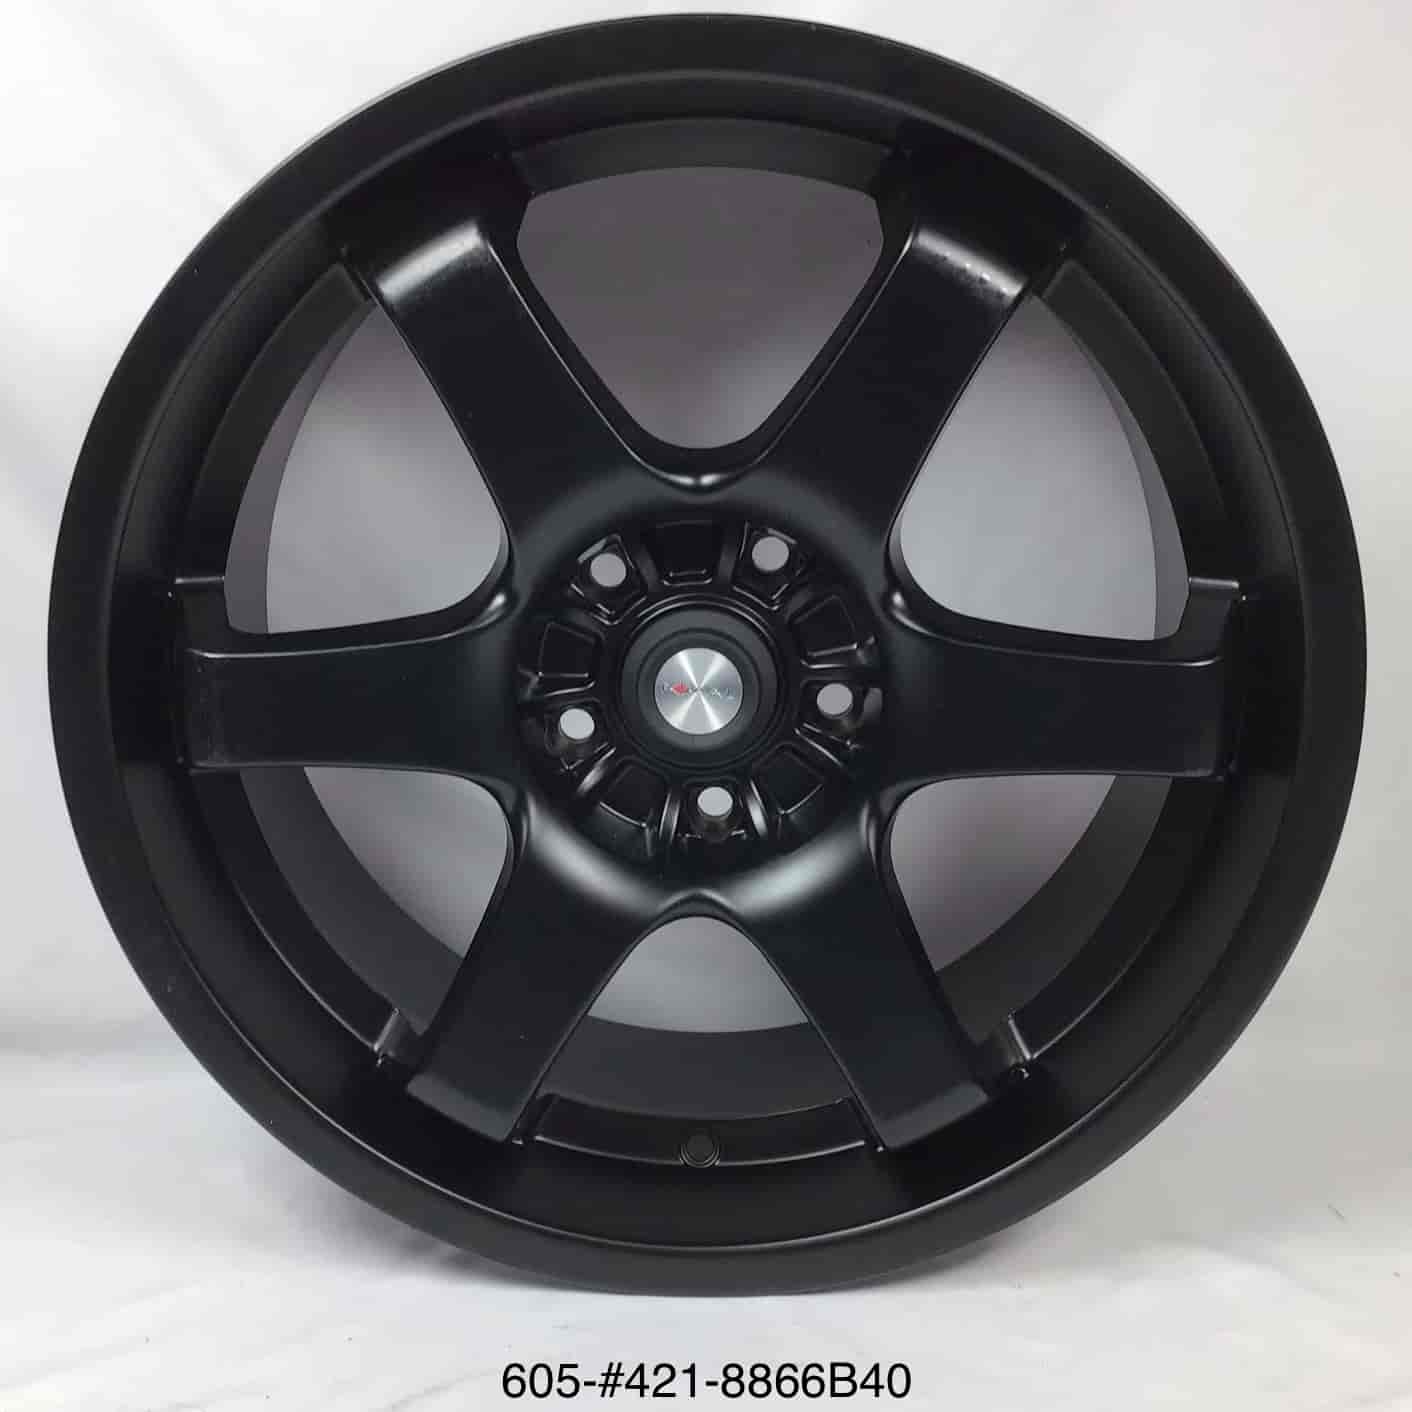 *BLEMISHED* Ultra 421 X Focal Series All Satin Black FWD Wheel Size: 18" x 8.5"